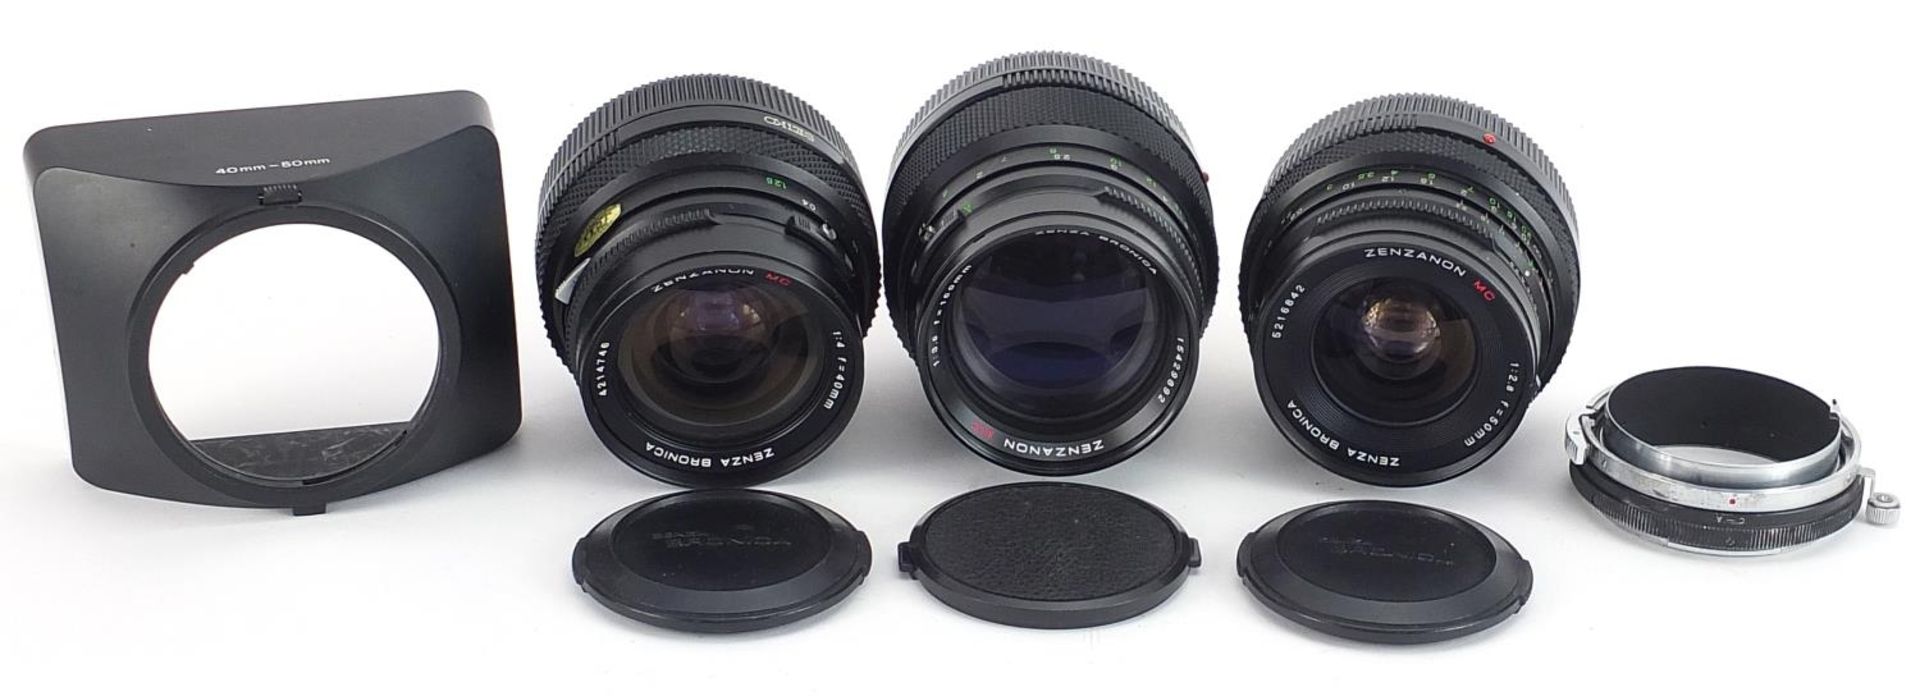 Three Zenza Bronica camera lenses and parts comprising 150mm, 40mm and 50mm